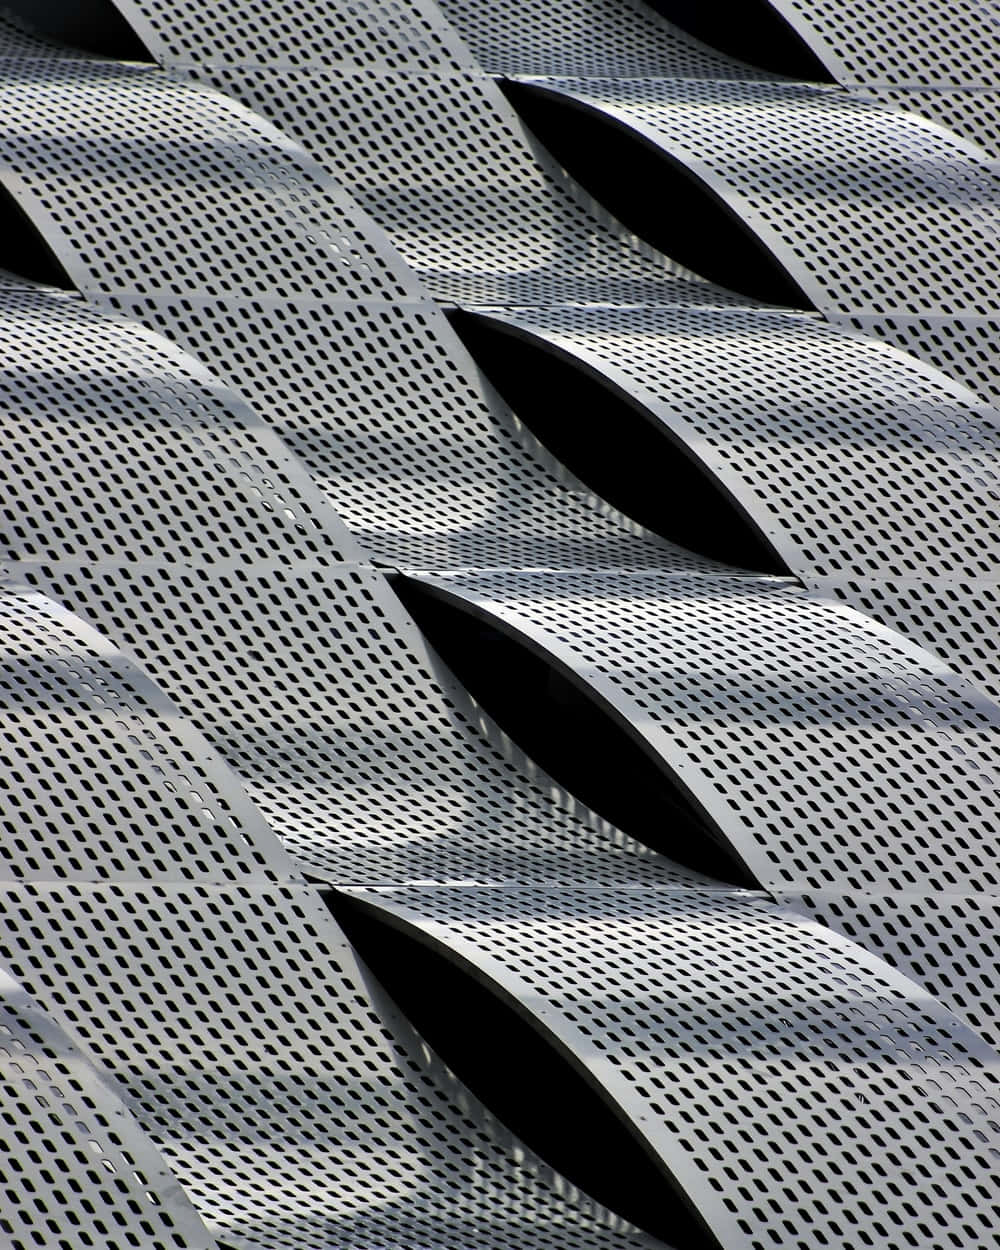 A Close Up Of A Metal Building With A Pattern